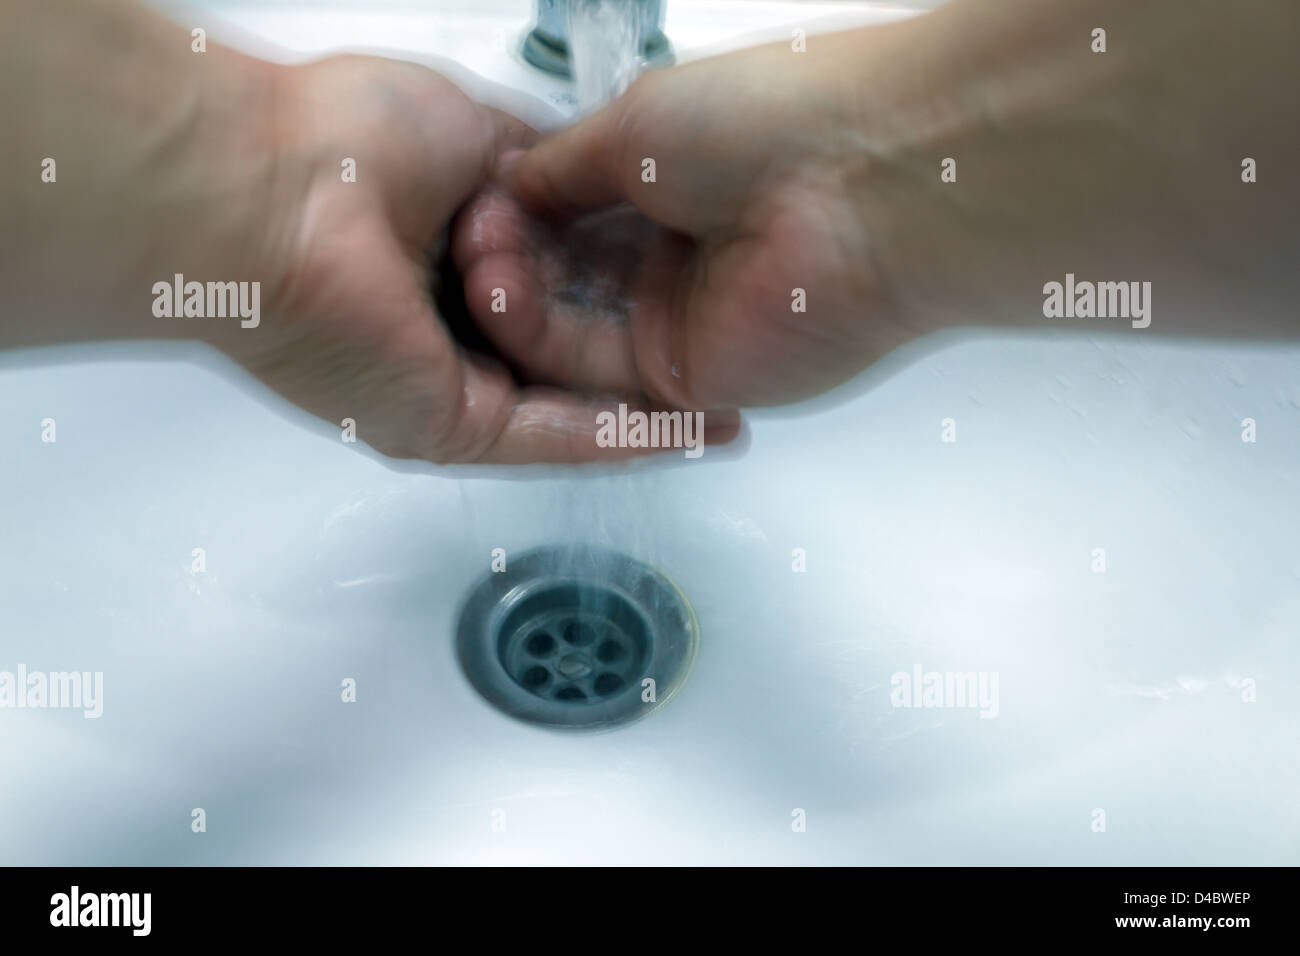 Kolobrzeg, Poland, a woman washes her hands thoroughly the Stock Photo